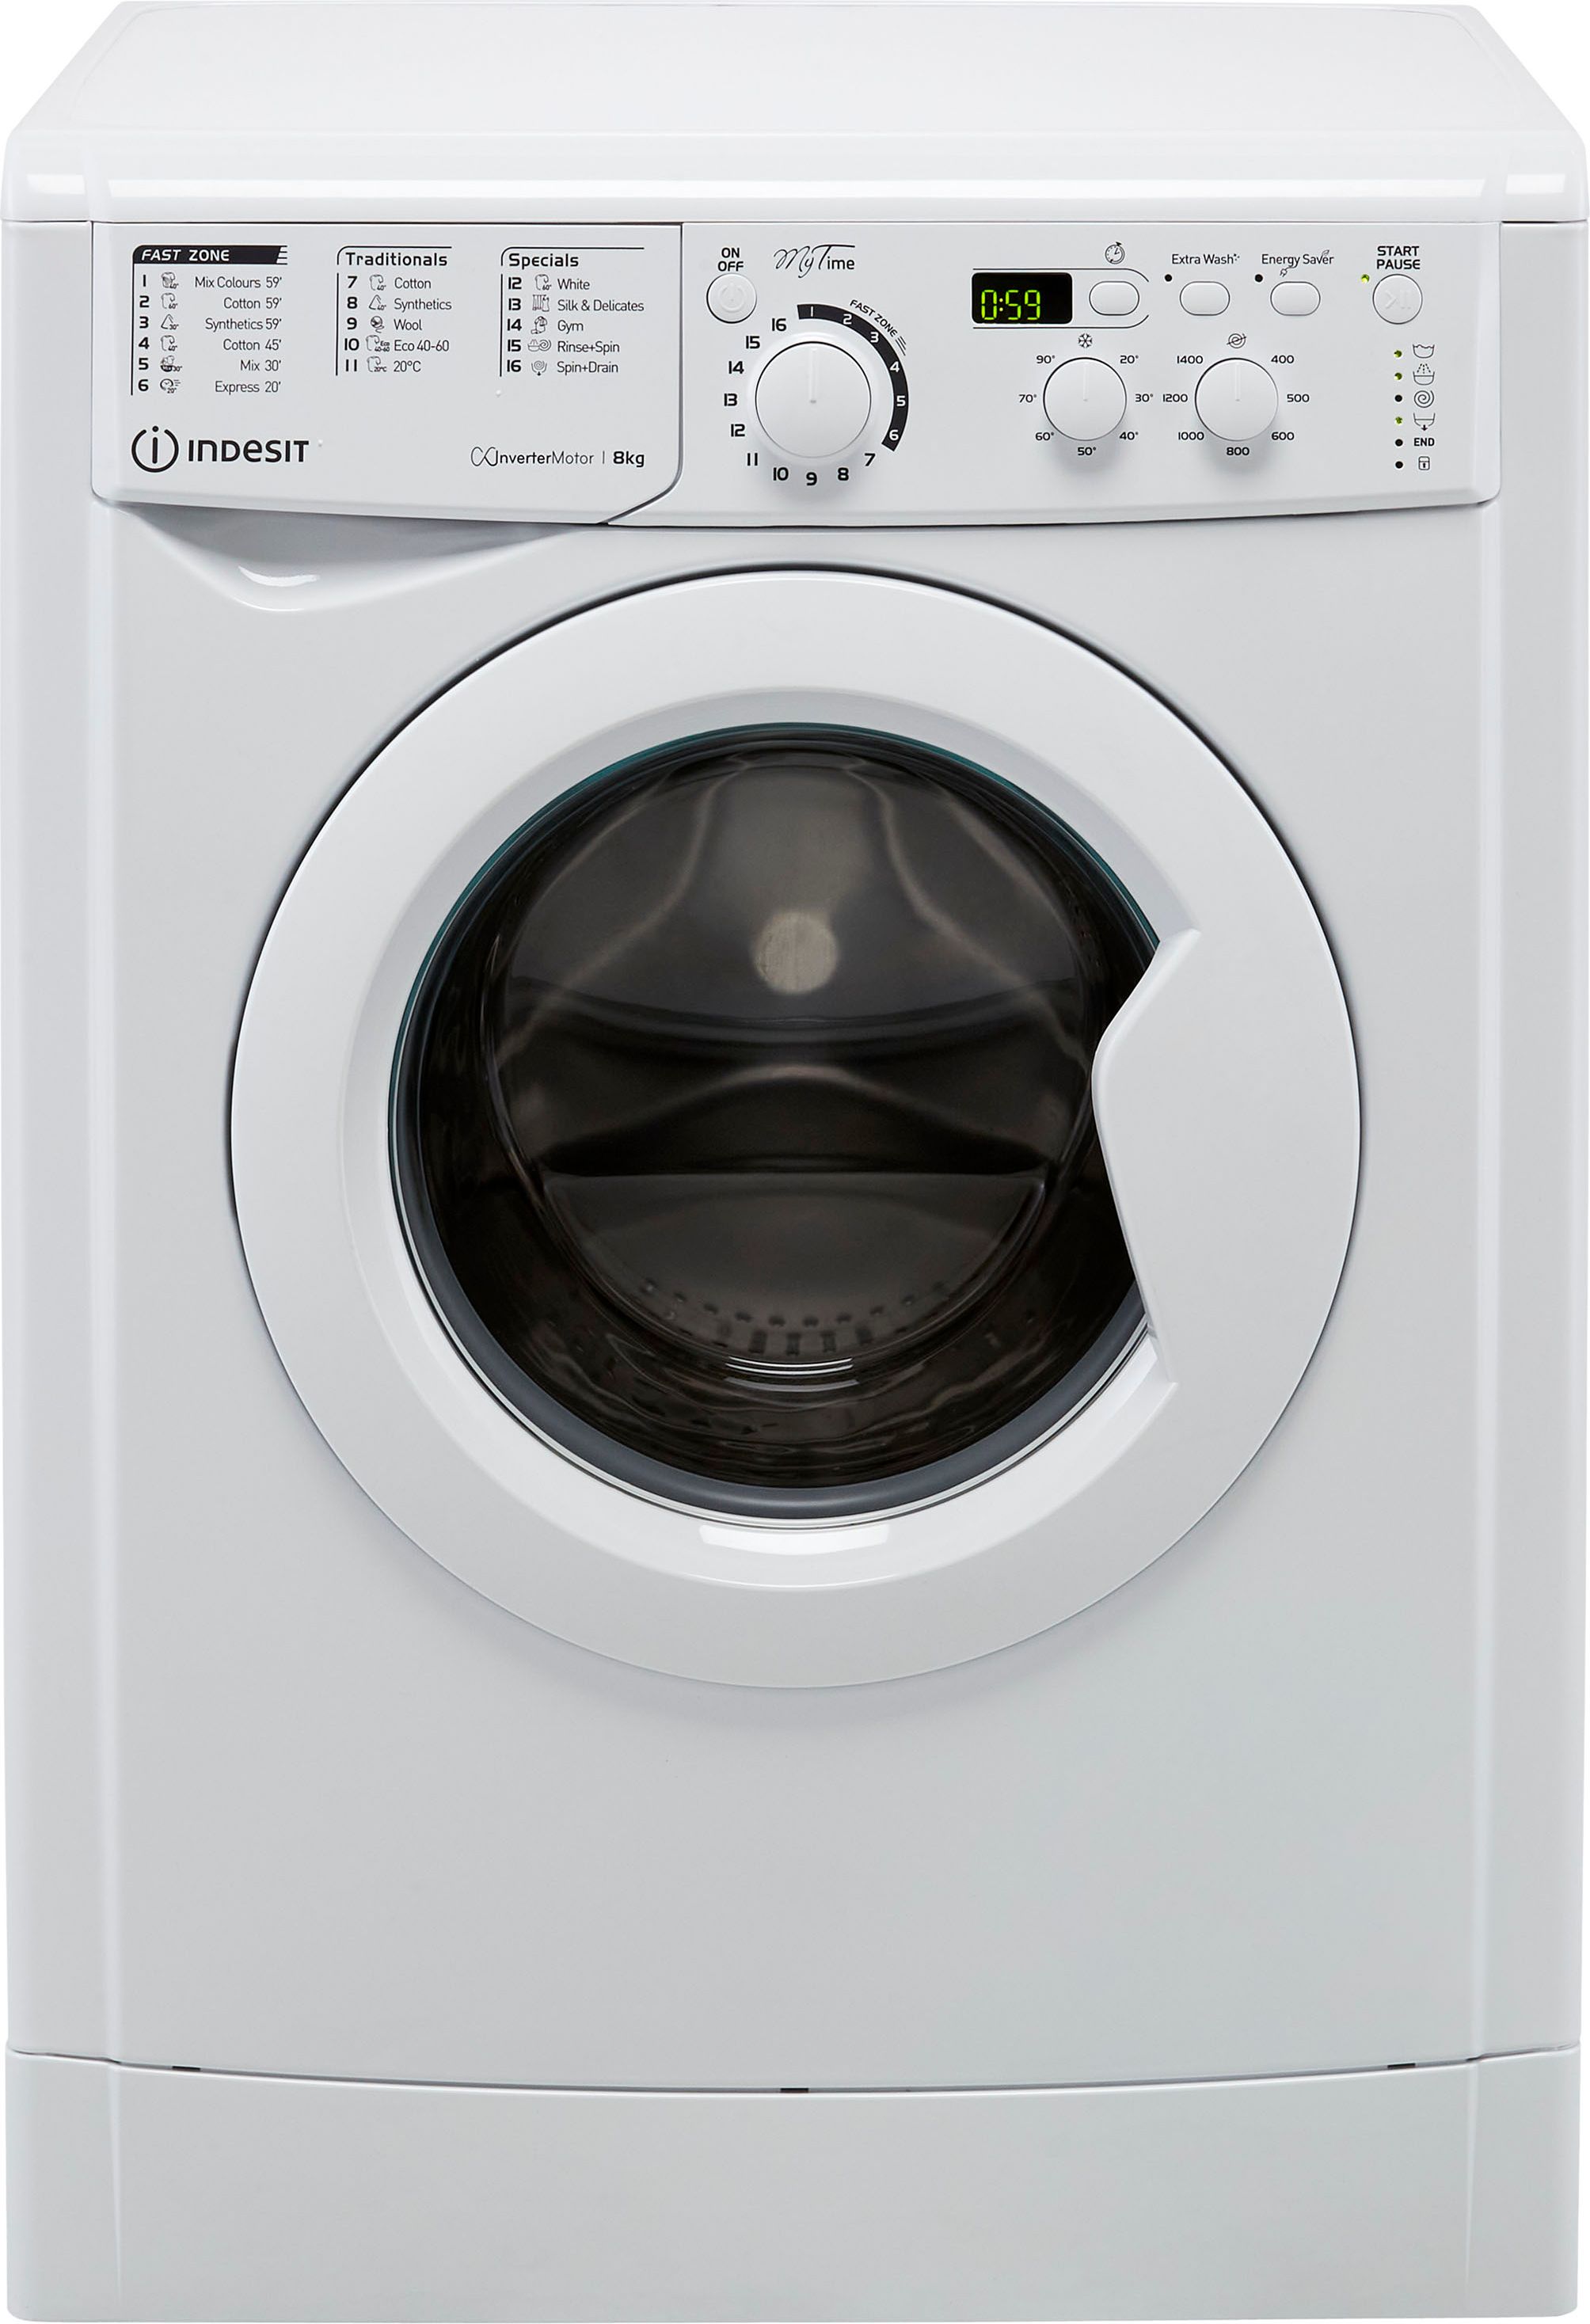 Indesit My Time EWD81483WUKN 8kg Washing Machine with 1400 rpm - White - D Rated, White